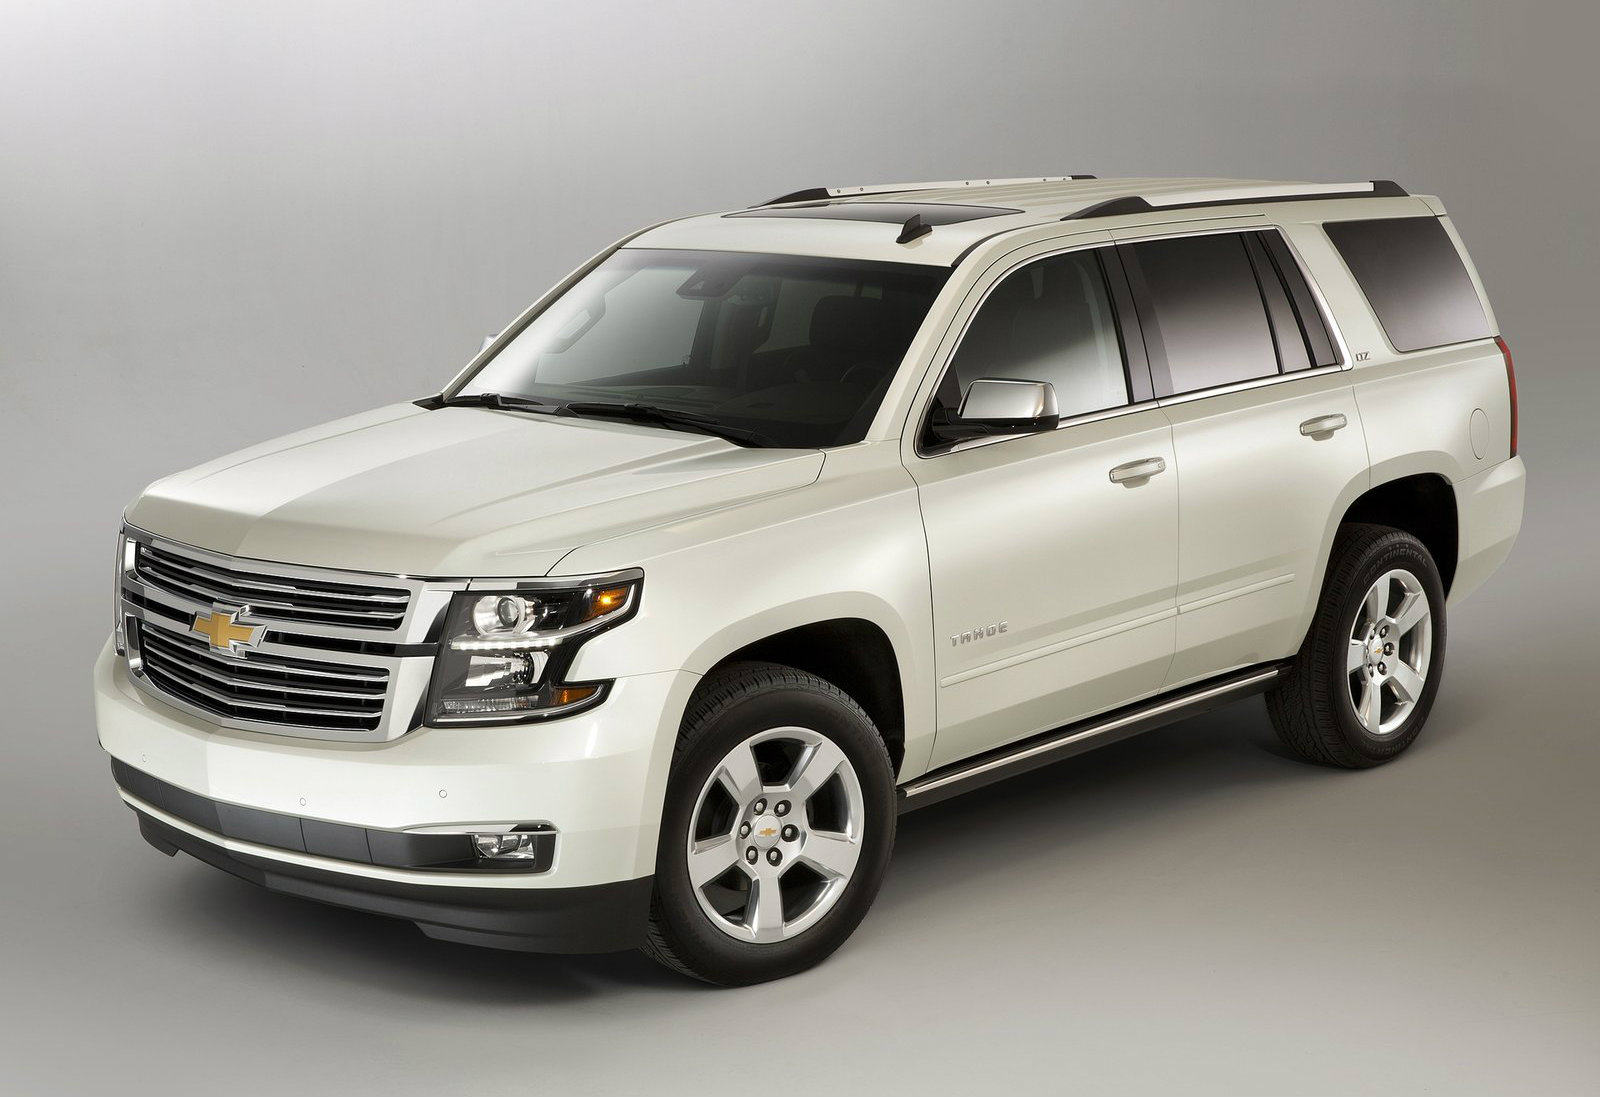 gm-full-size-suvs-updated-for-the-2015i-model-year-photo-gallery_5